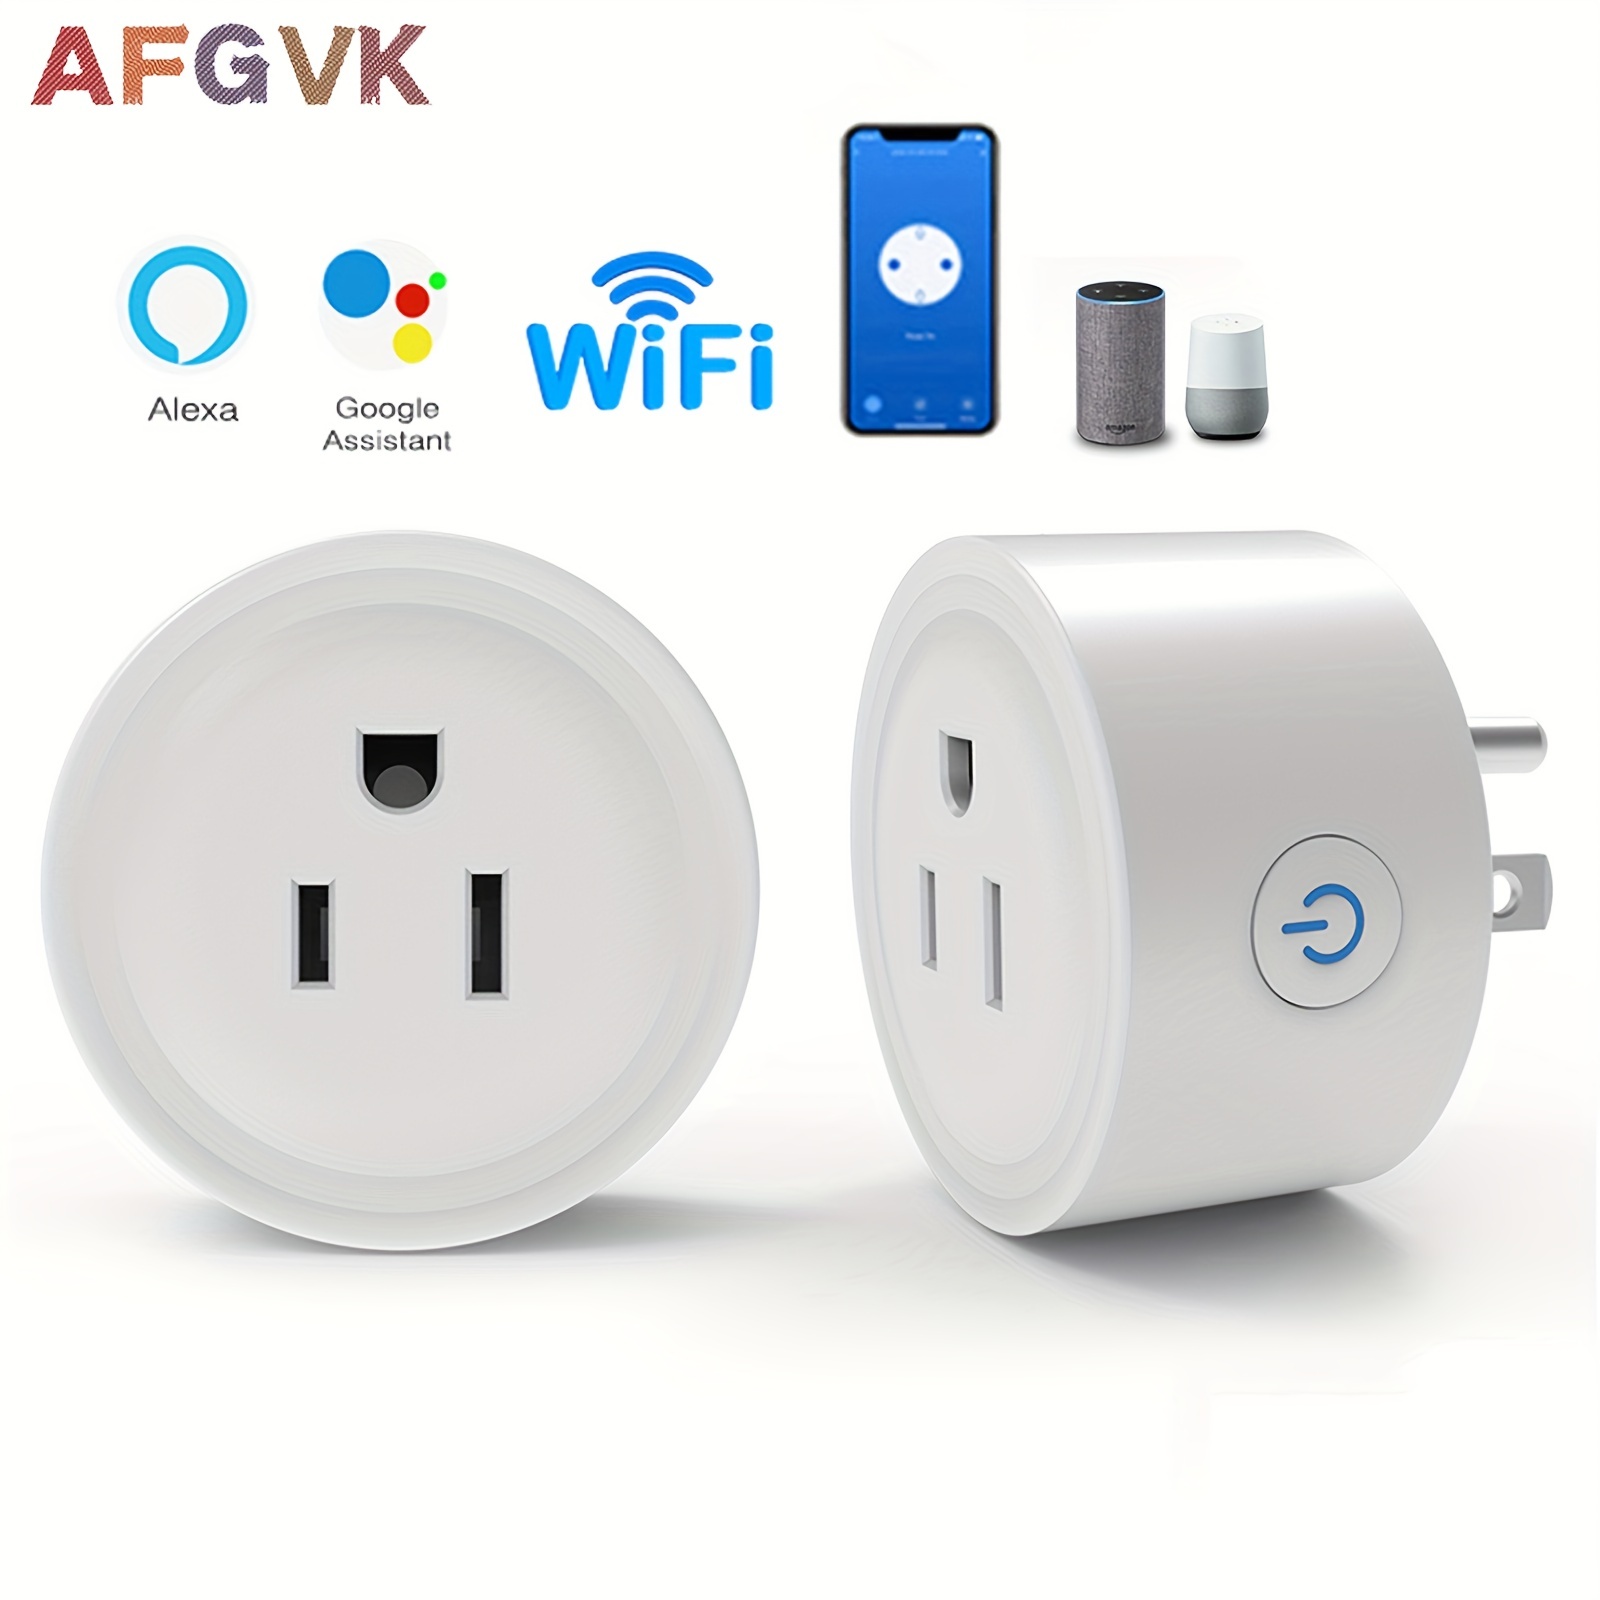 Mini Smart Plug, Smart Outlet Work with Alexa and Google Home, Voice  Control, Remote Control, FCC Certified, Vesync APP, 2.4G WiFi Only, 10 Amp,  Wi-Fi Outlet,No Hub Required.